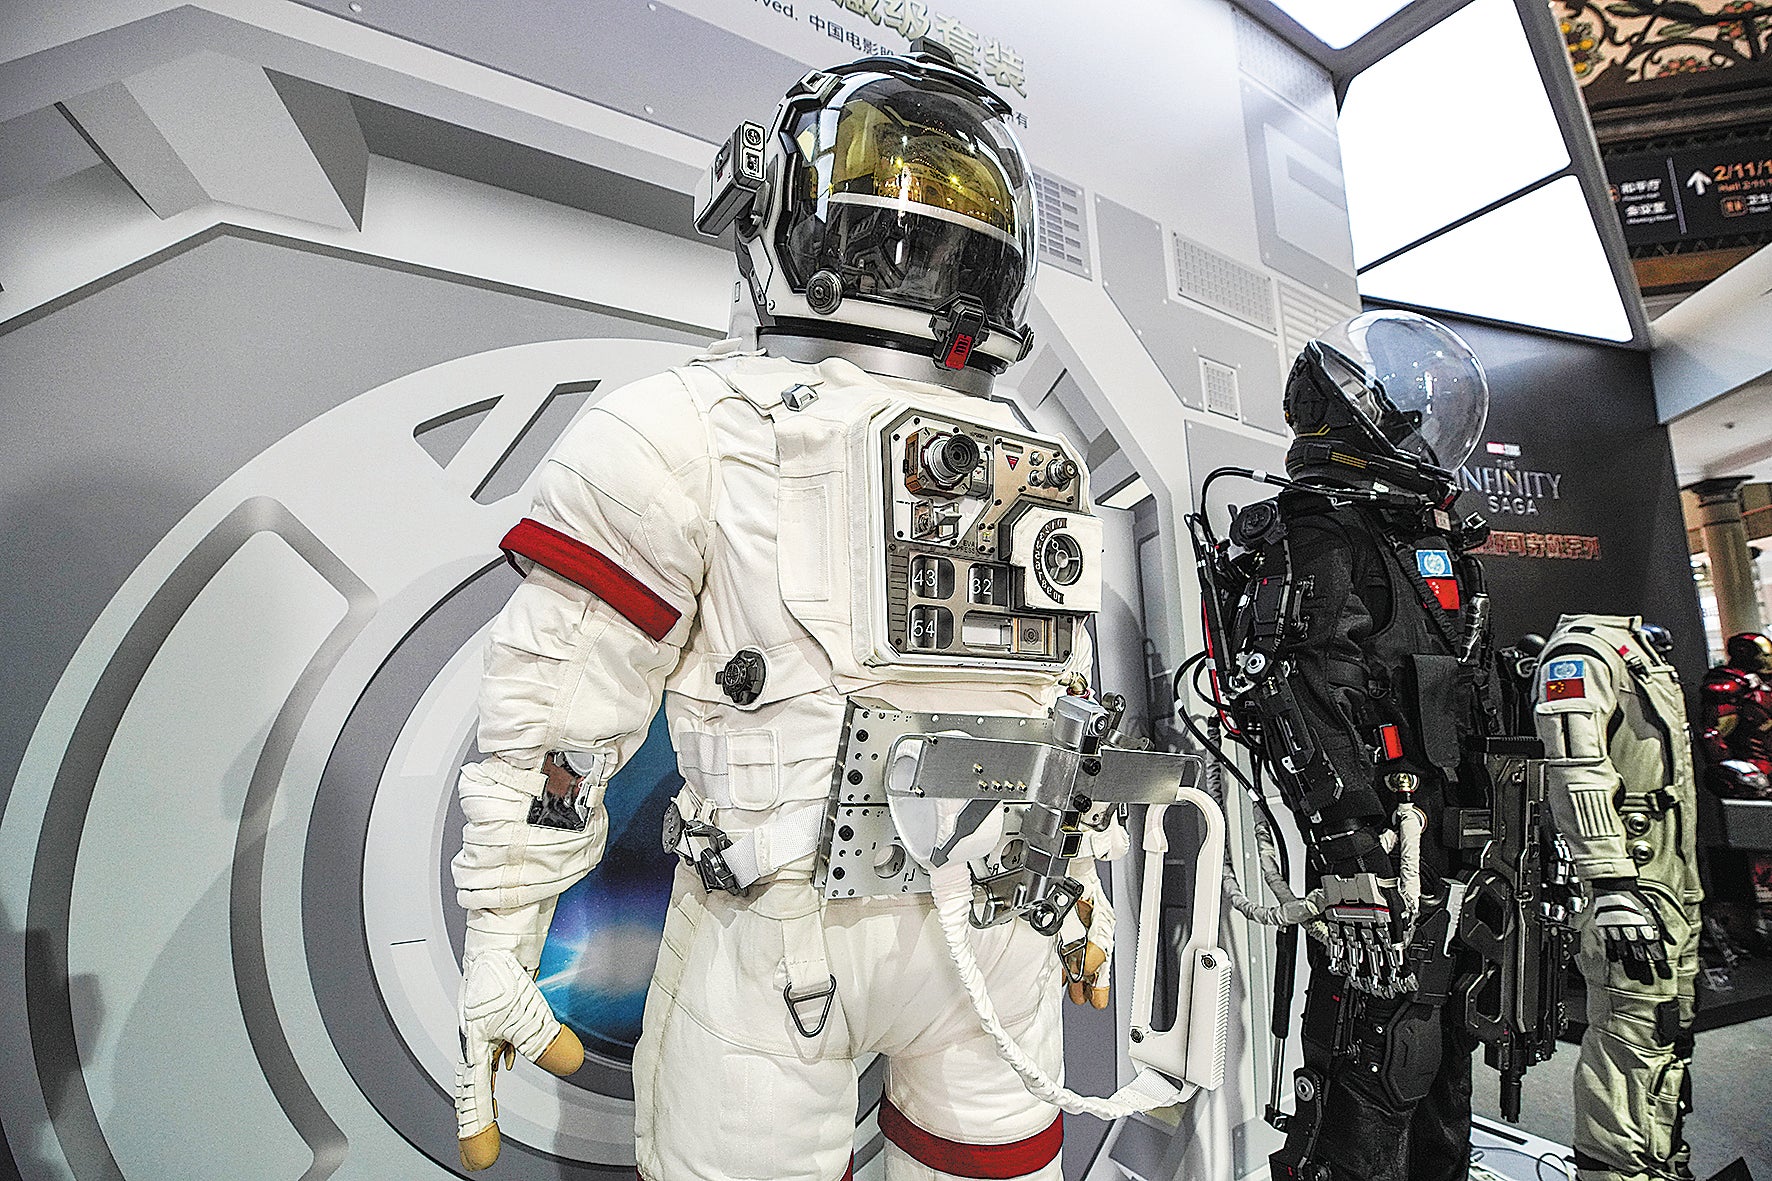 Prop and costume items from The Wandering Earth are exhibited at the Hobby Expo China in Beijing on April 21, 2023